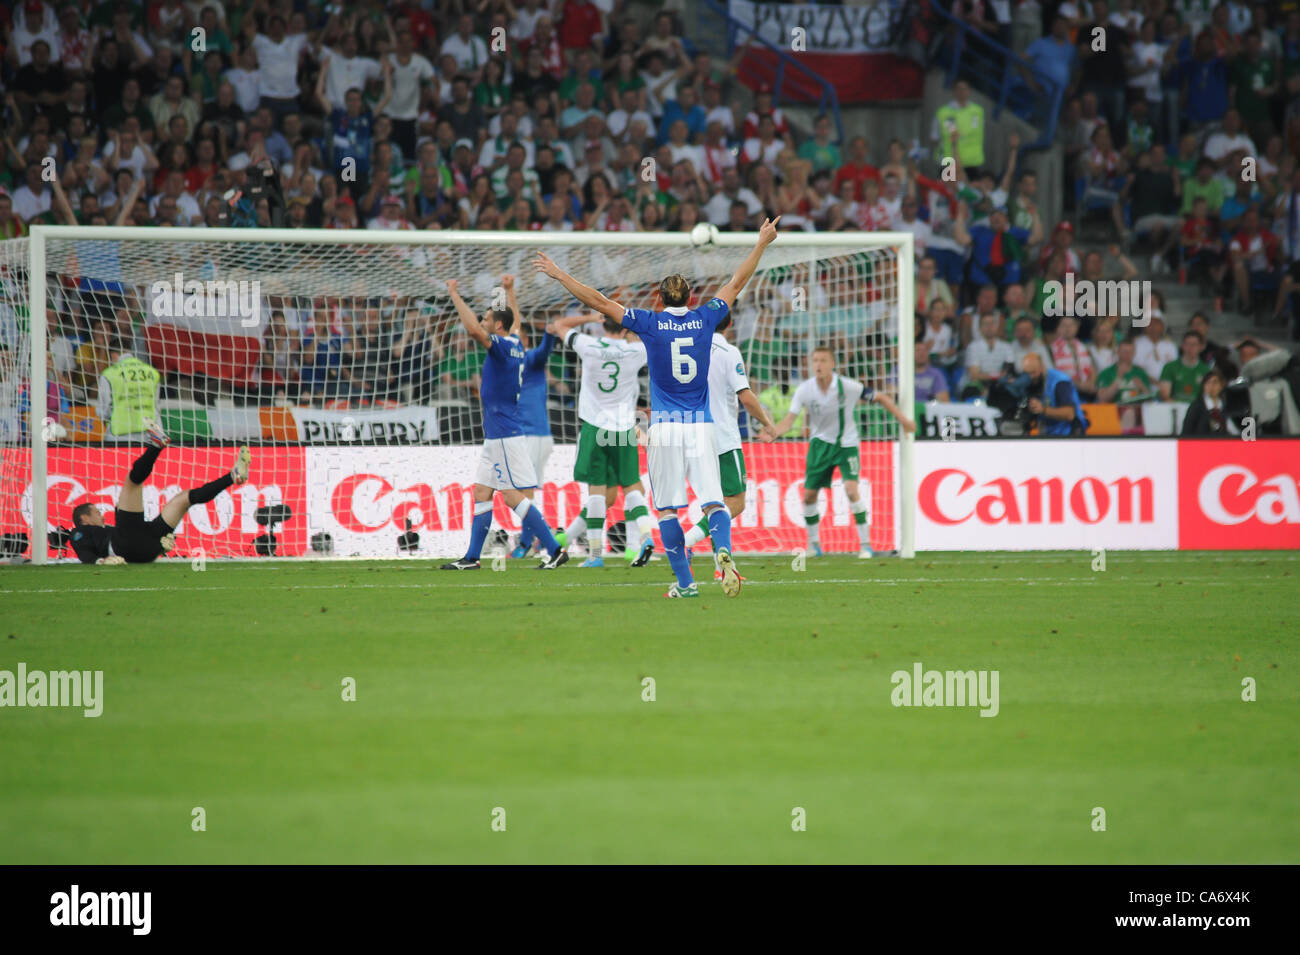 18.06.2012 , Poznan, Poland. Shay Given (Aston Villa FC) Rep of Ireland concedes the first goal during the European Championship Group C game between Italy and Ireland from the Municipal Stadium. Stock Photo